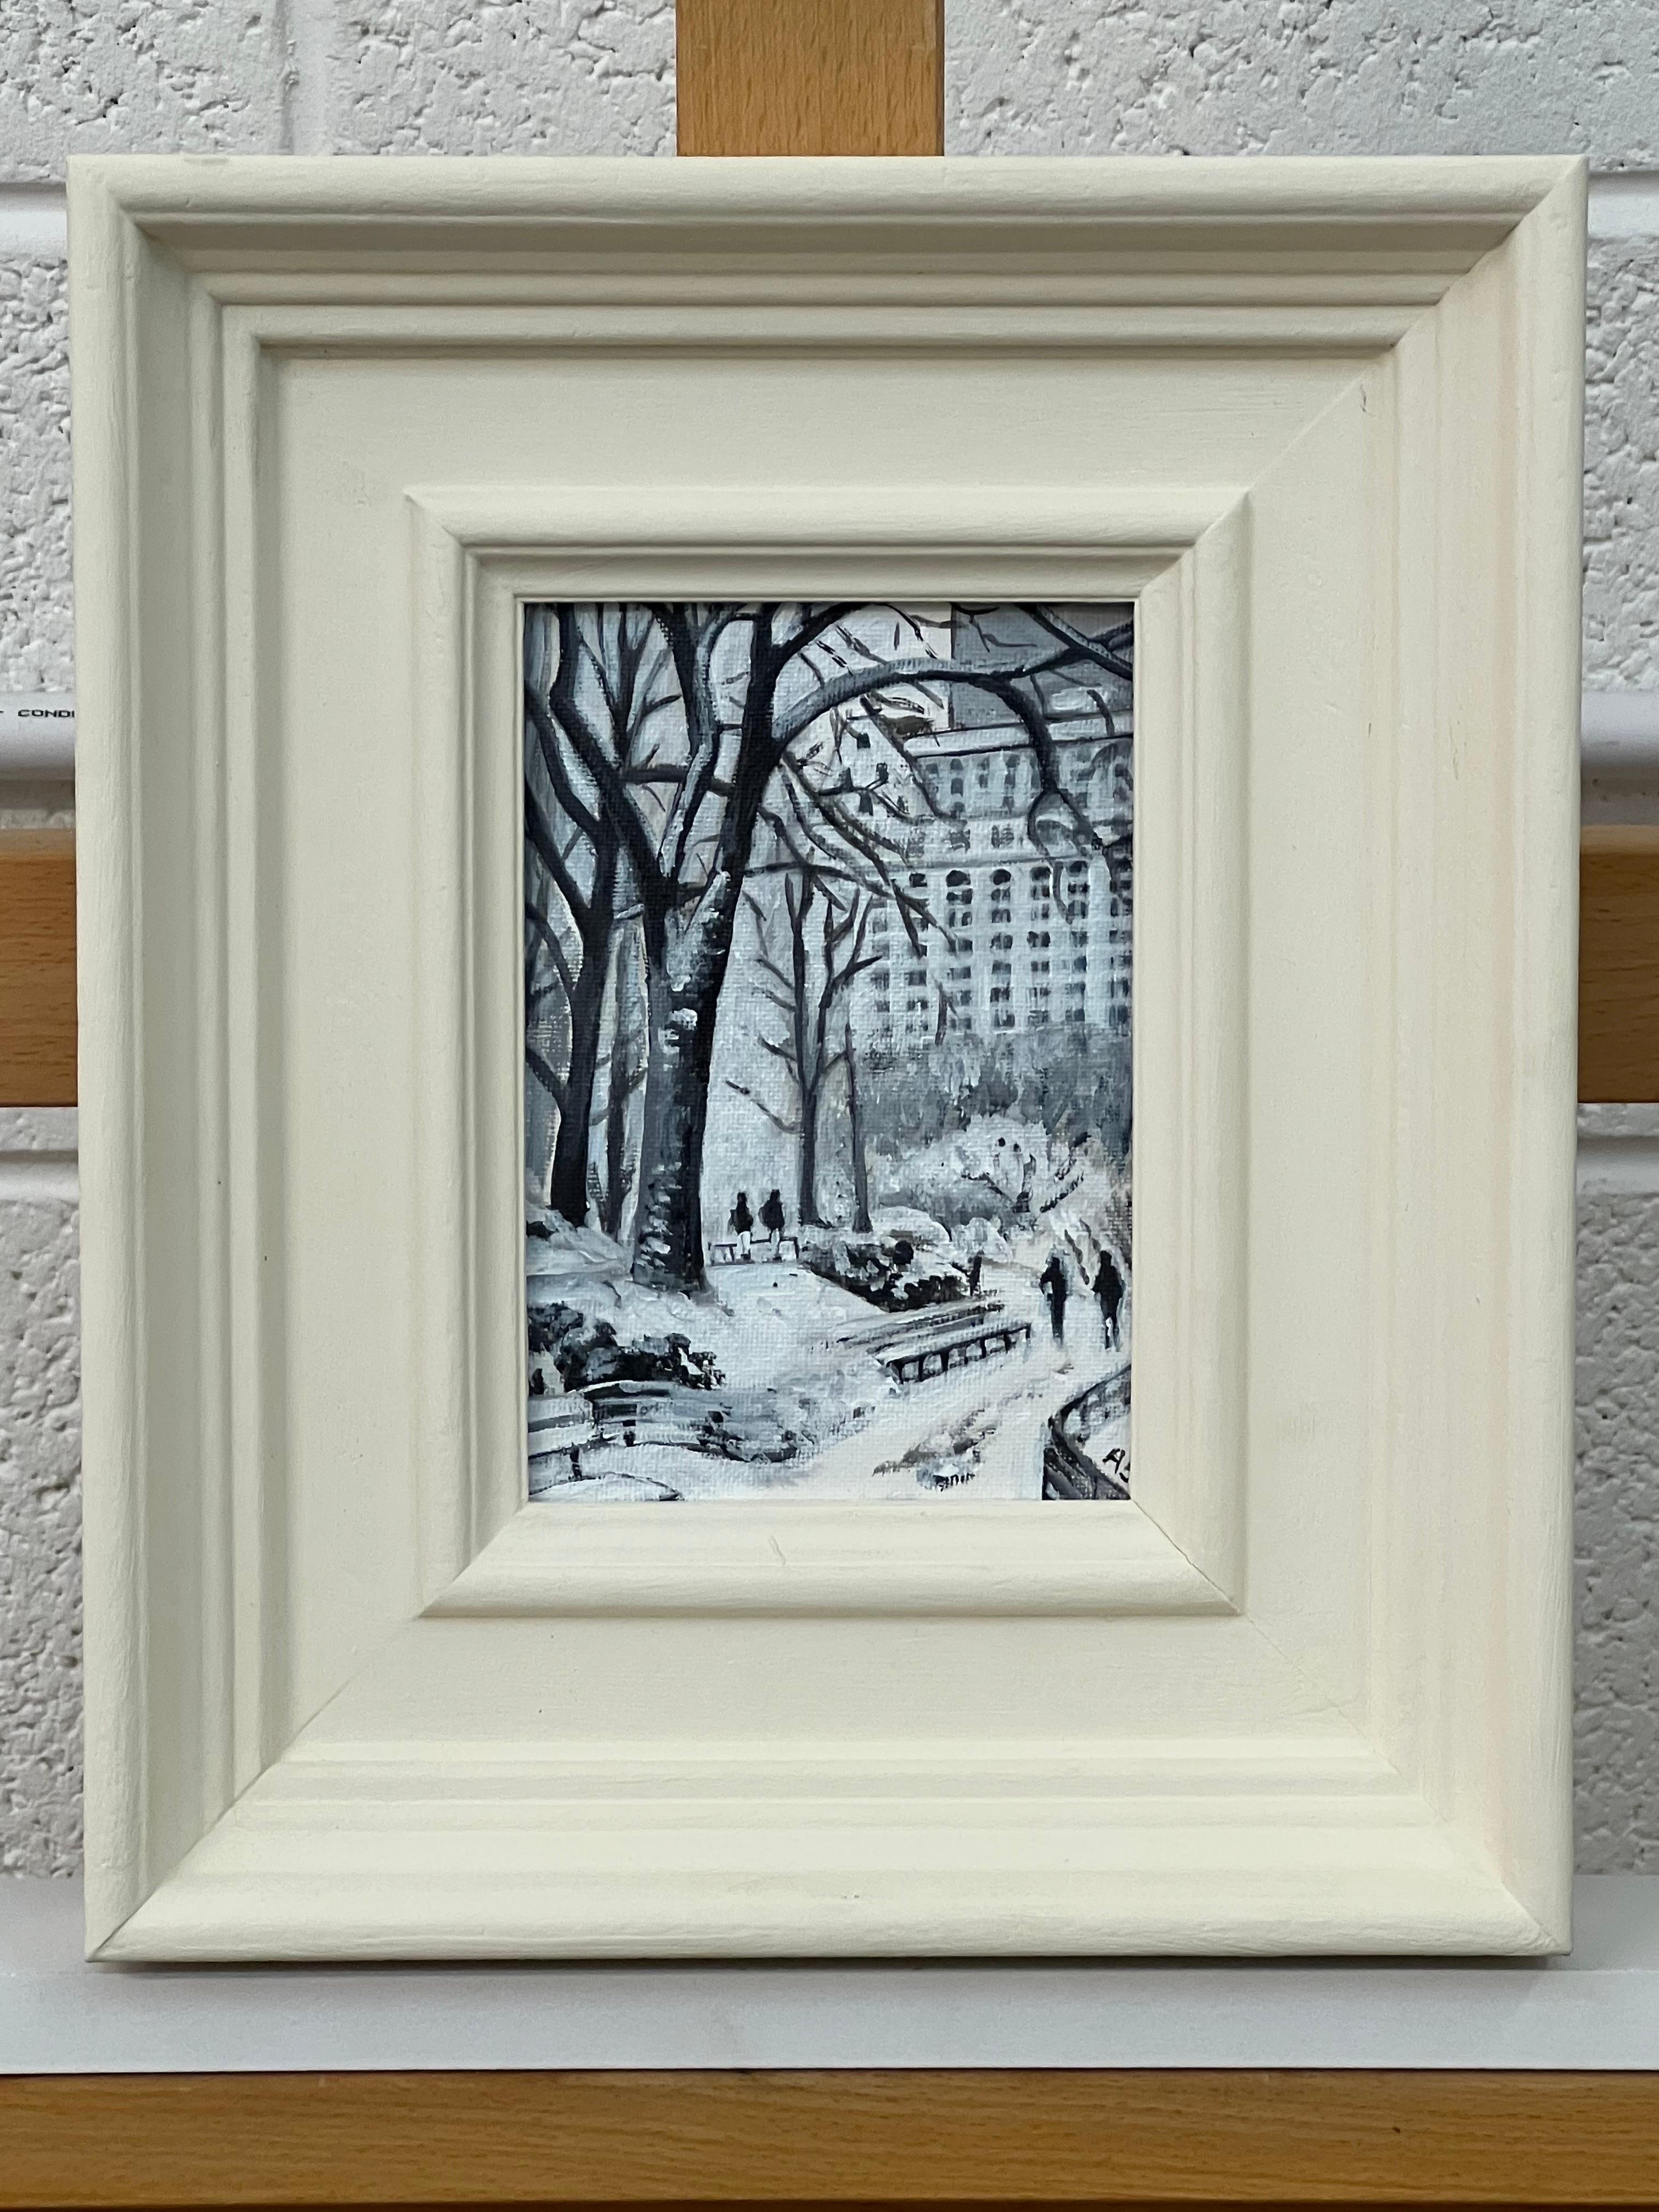 Miniature Study of Central Park New York City in Winter by Contemporary British Artist, Angela Wakefield

Art measures 5 x 7 inches
Frame measures 10 x 12 inches 

Angela Wakefield has twice been on the front cover of ‘Art of England’ and featured